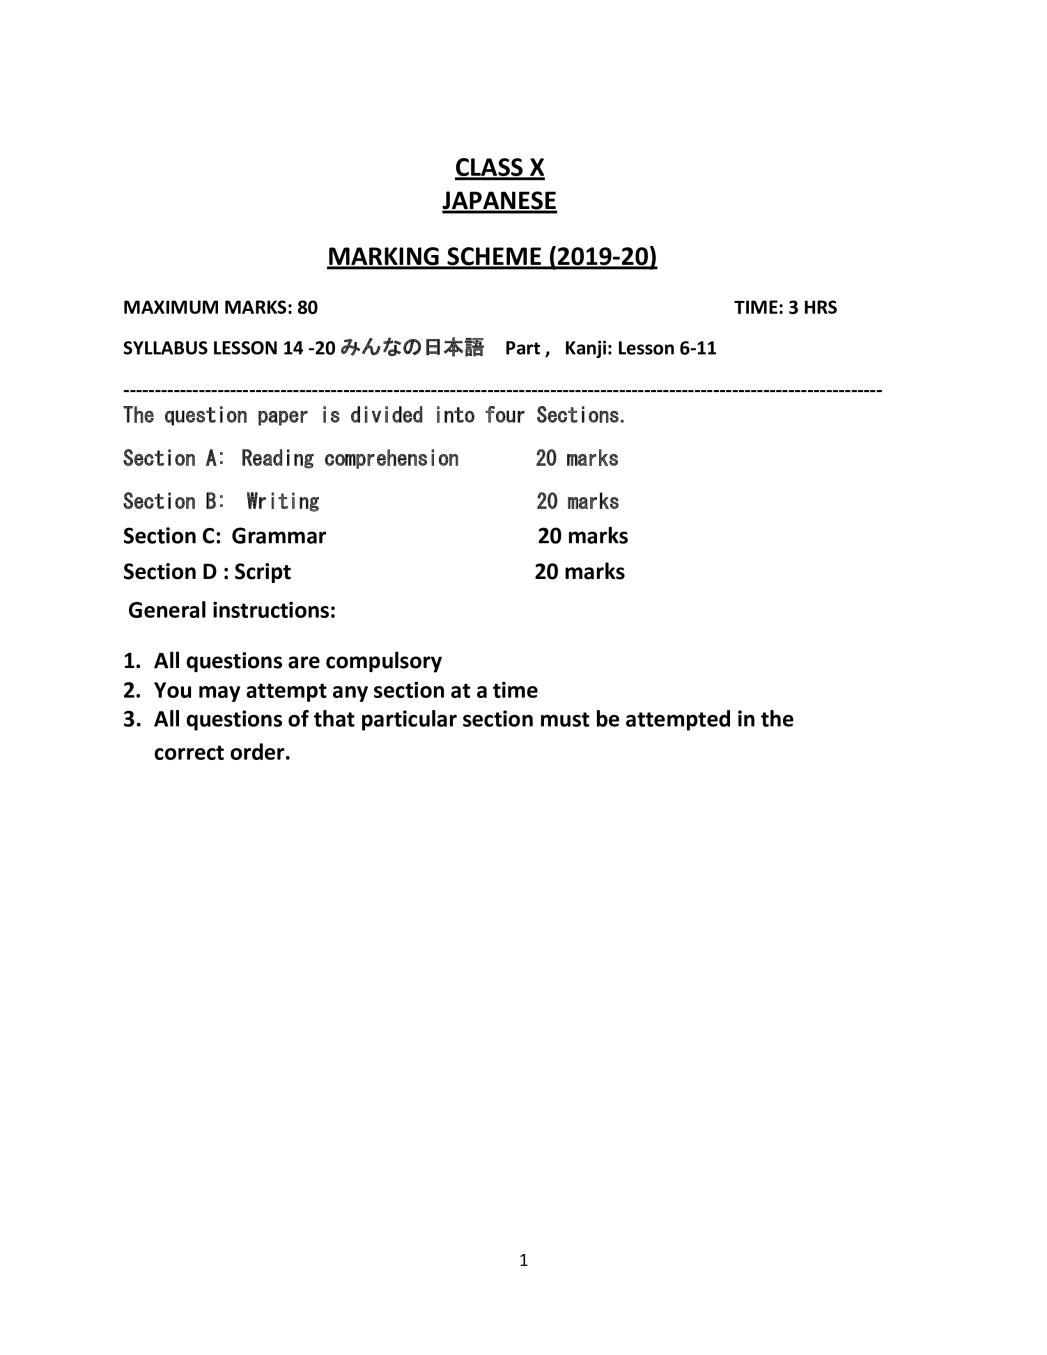 CBSE Class 10 Marking Scheme 2020 for Japanese - Page 1